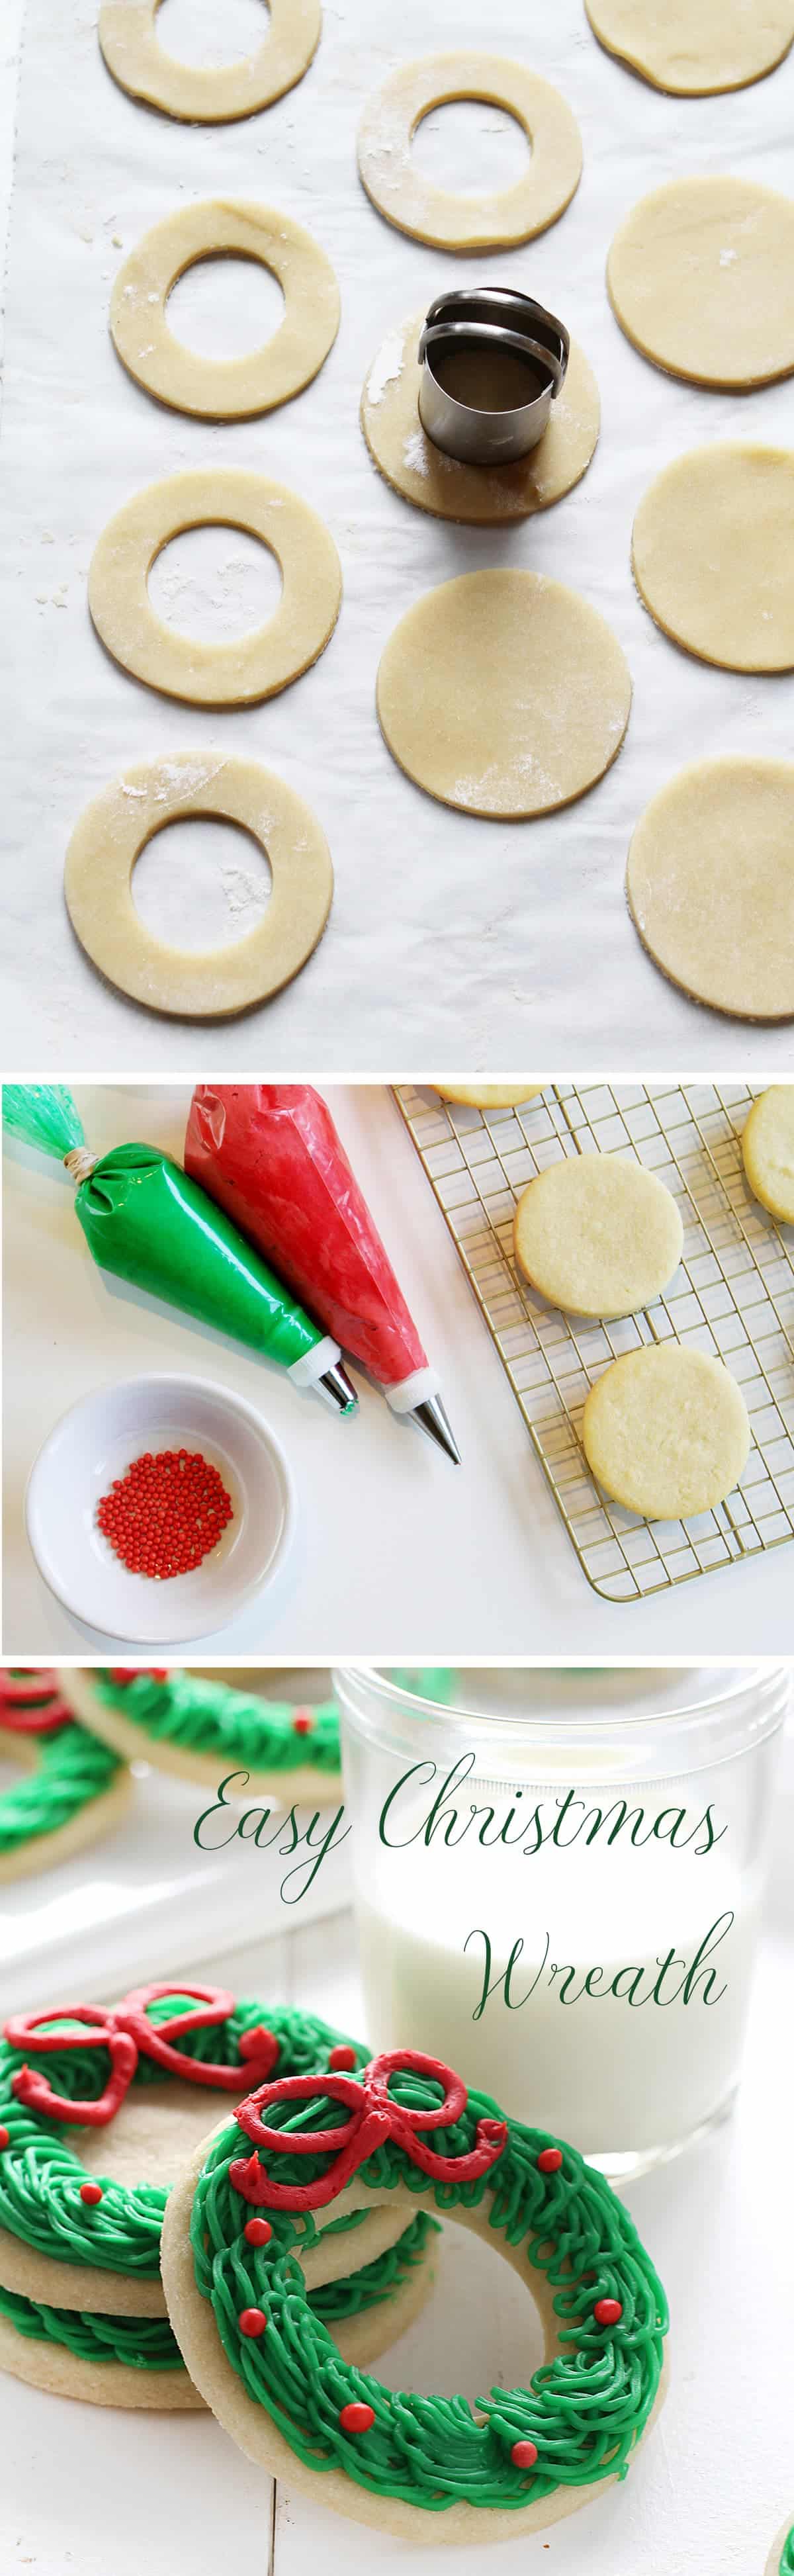 Quick and Easy Sugar Cookie Christmas Wreath!